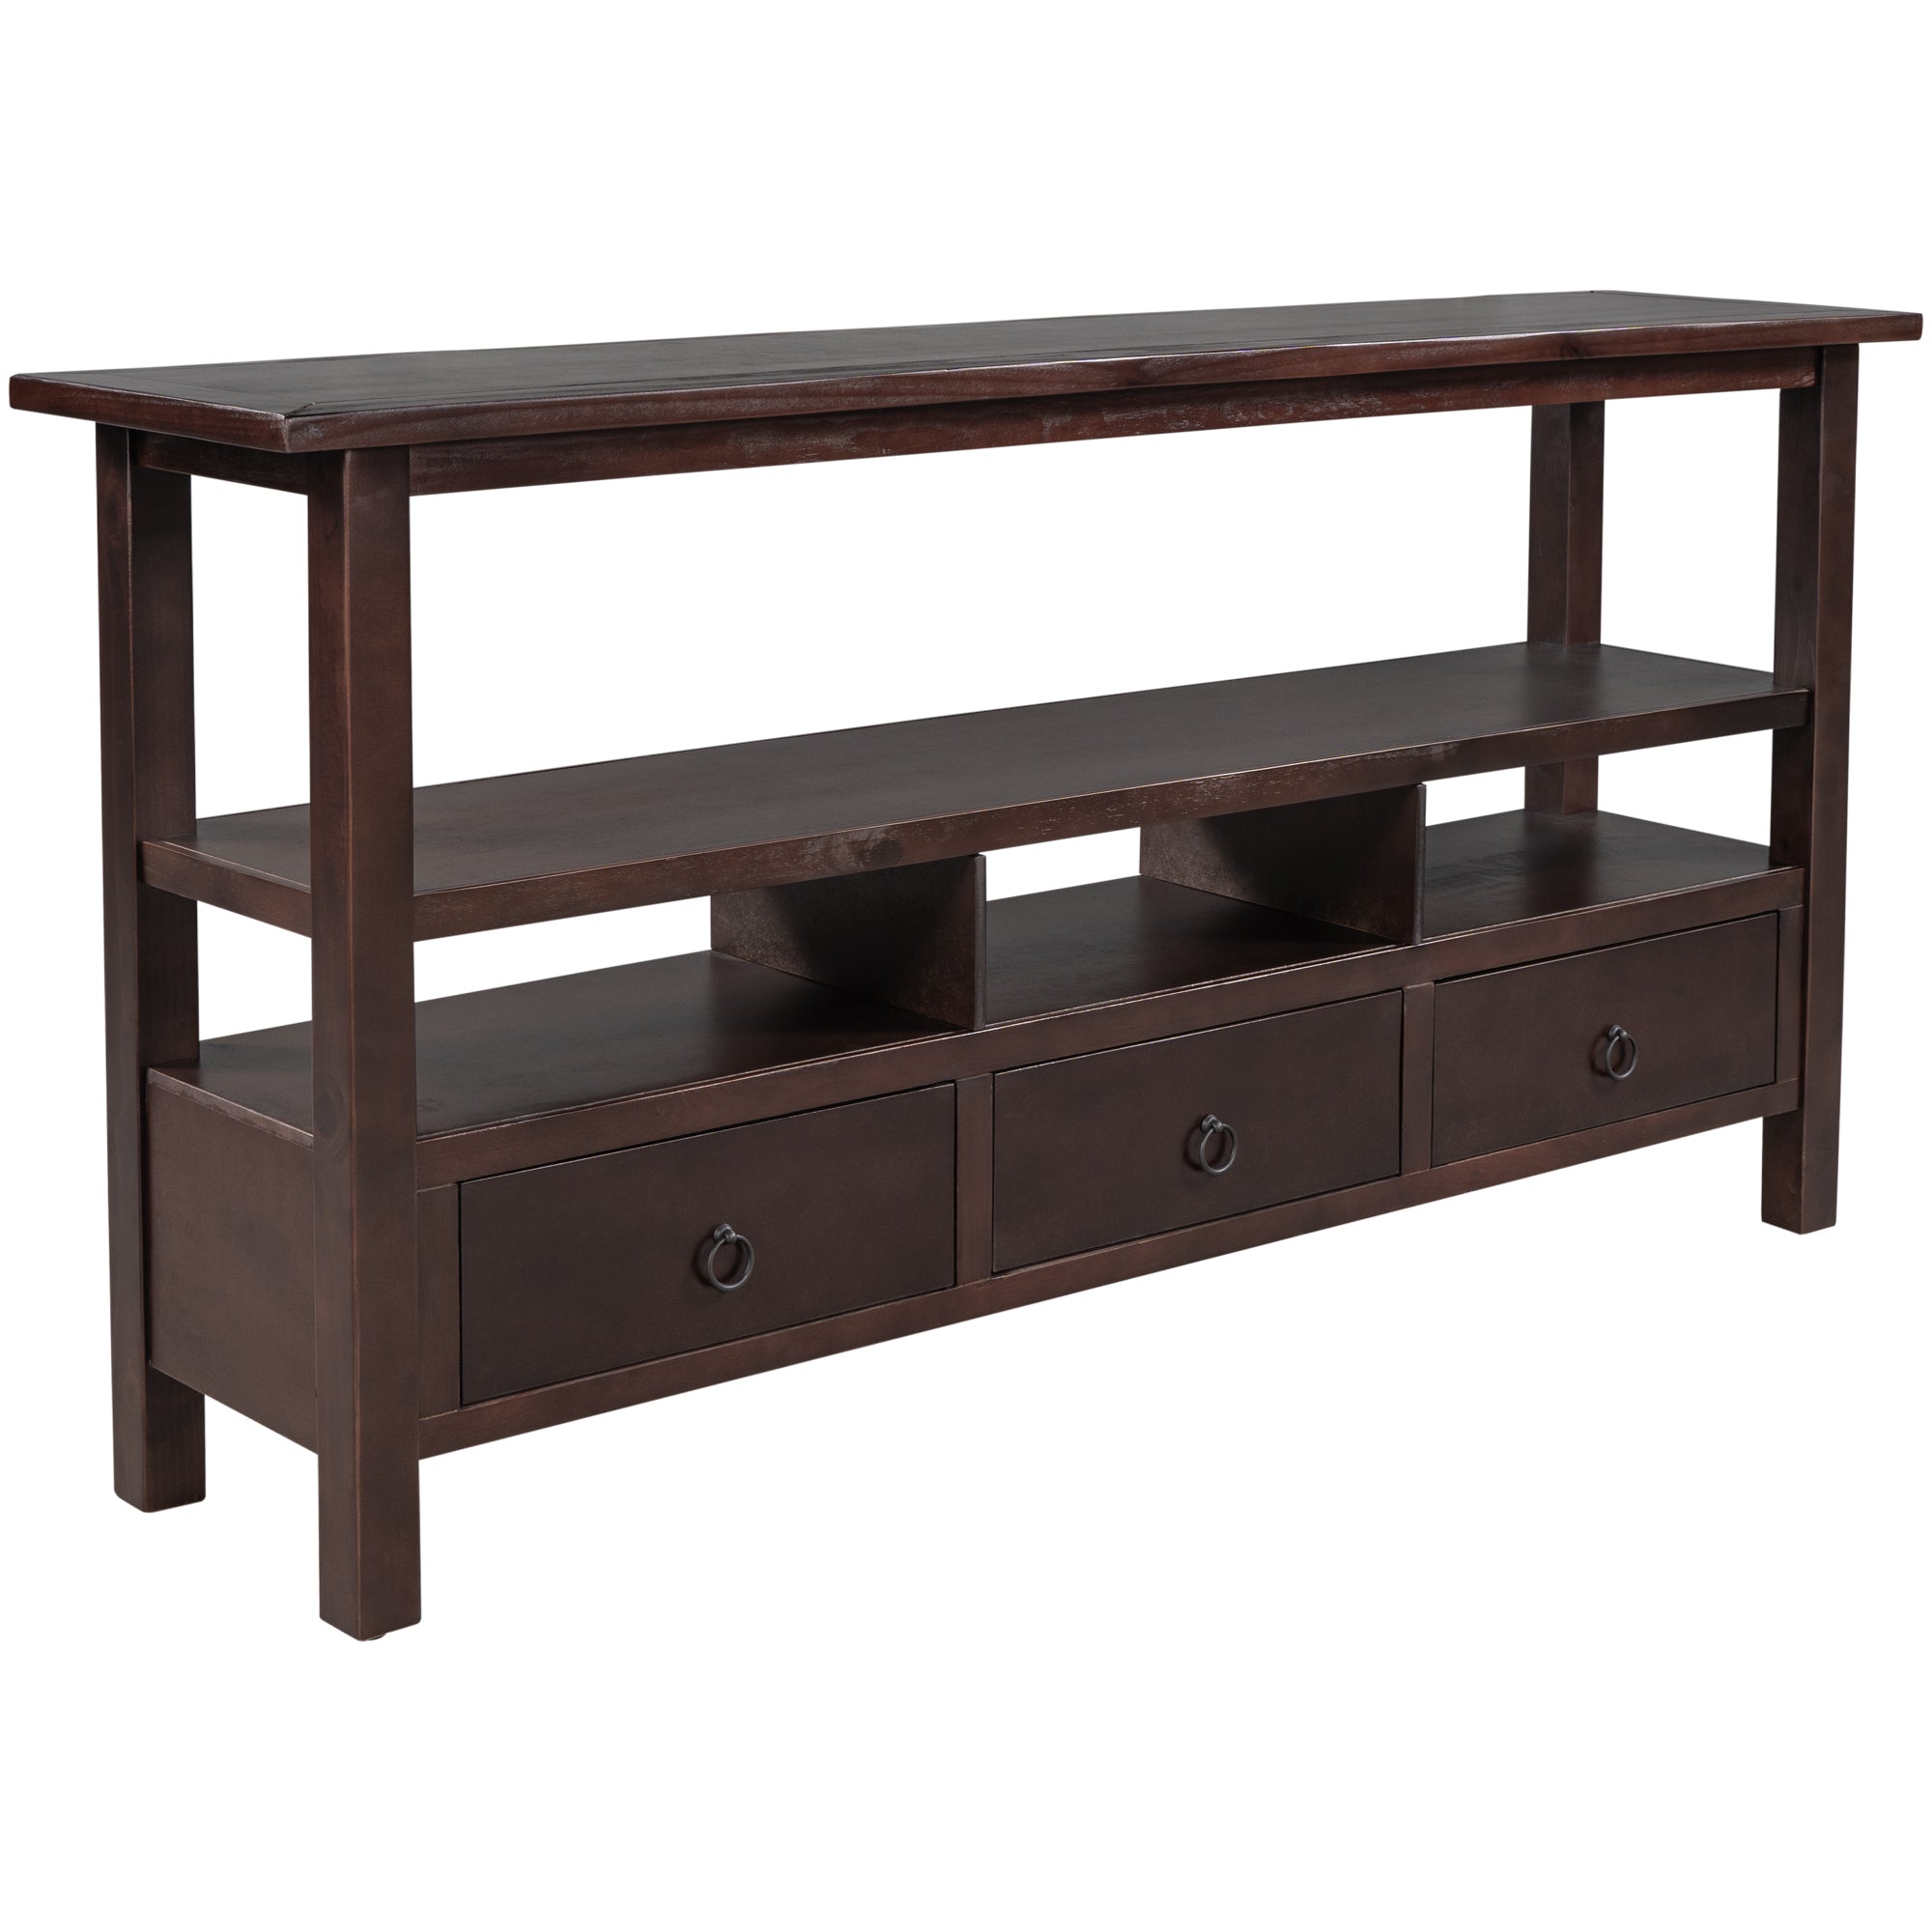 TREXM Antique 2-tier Table Top with Three Drawers (Espresso)